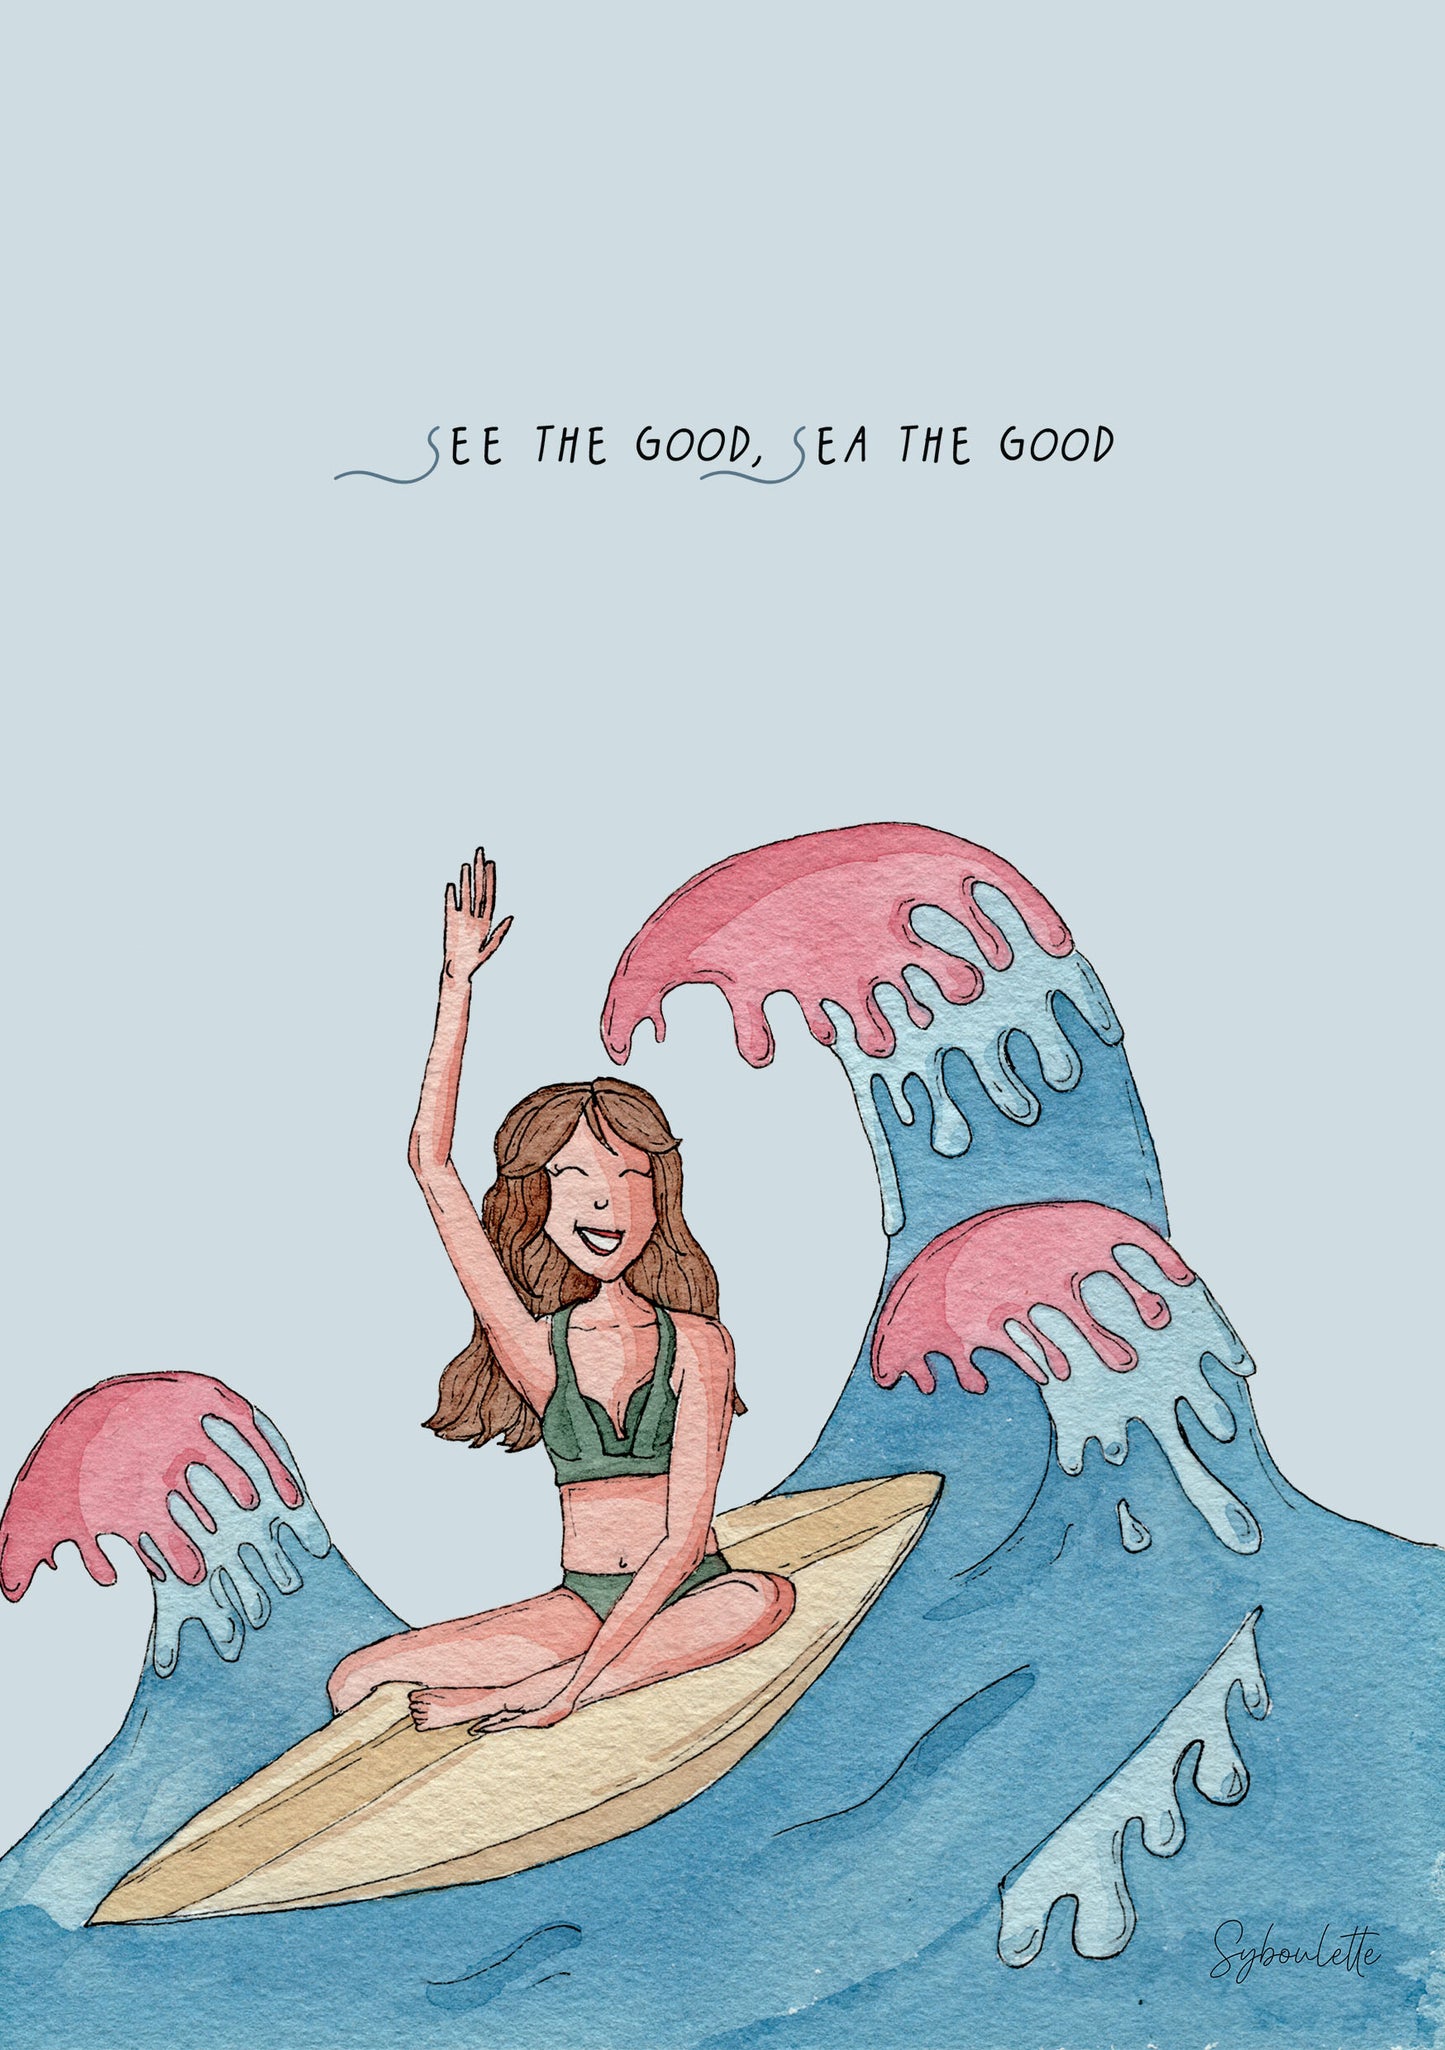 SEE THE GOOD - affiche aquarelle